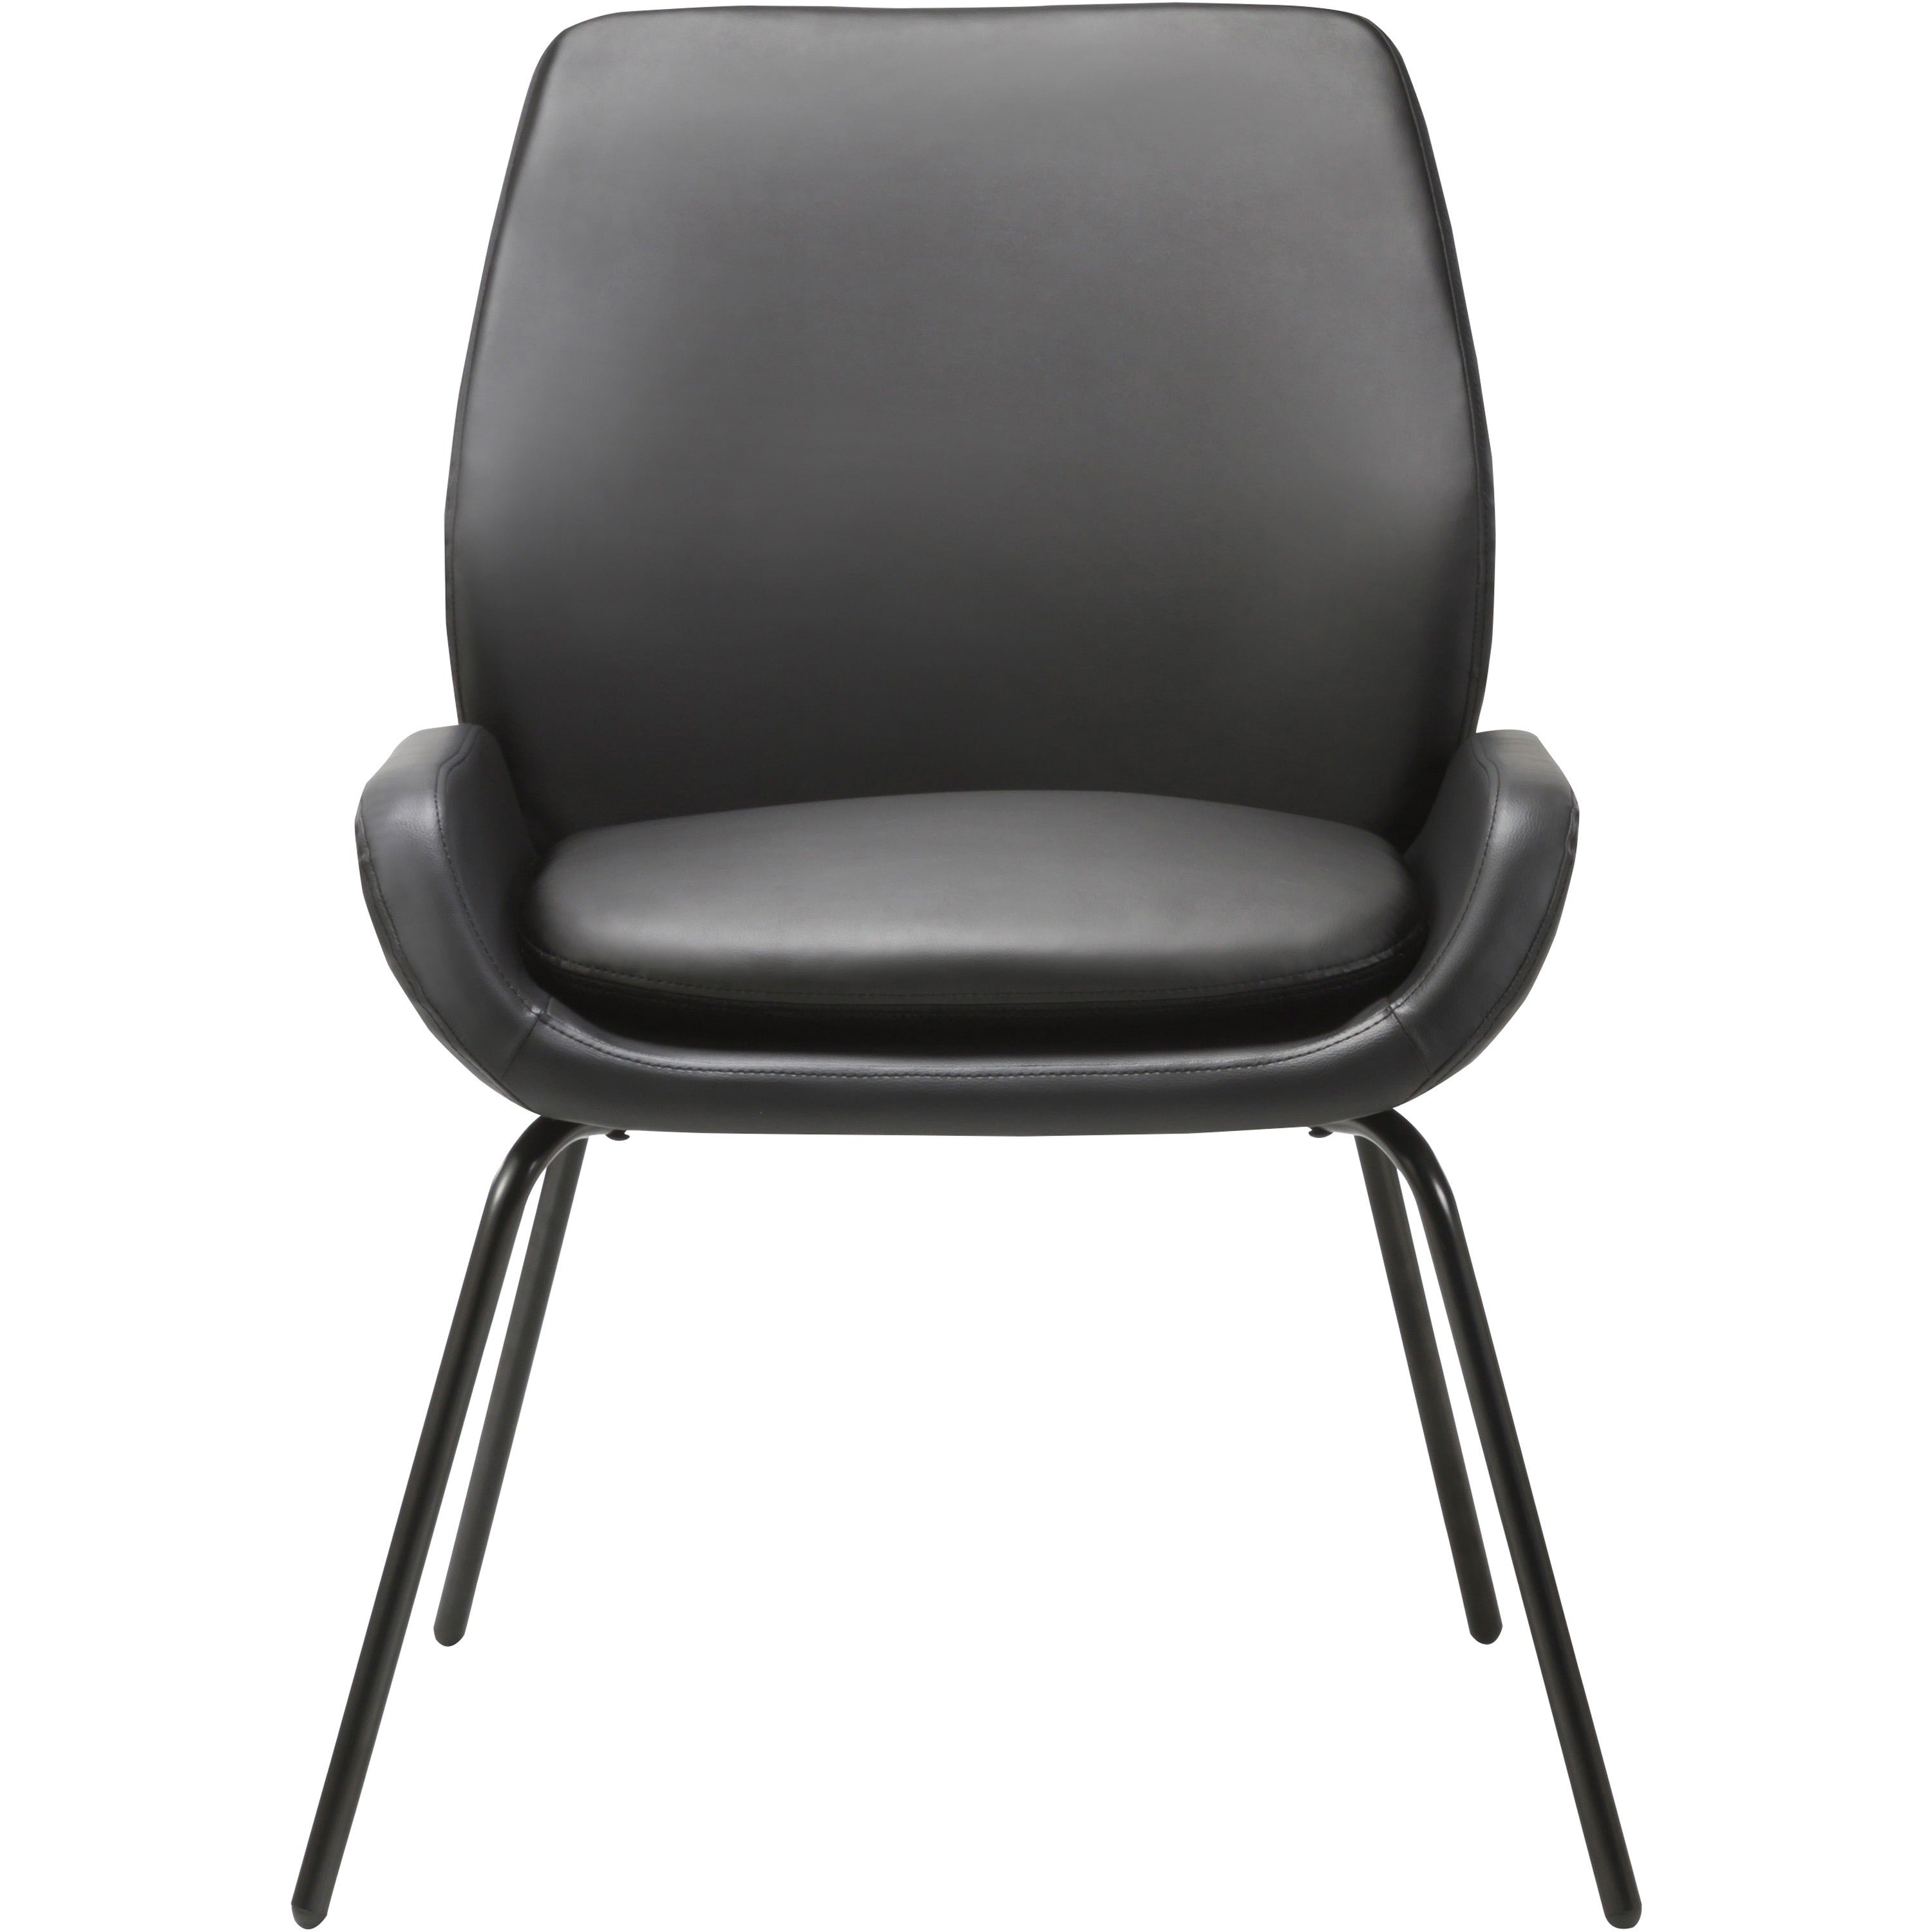 lorell-u-shaped-seat-guest-chair-bonded-leather-seat-bonded-leather-back-black-1-each_llr68574 - 2